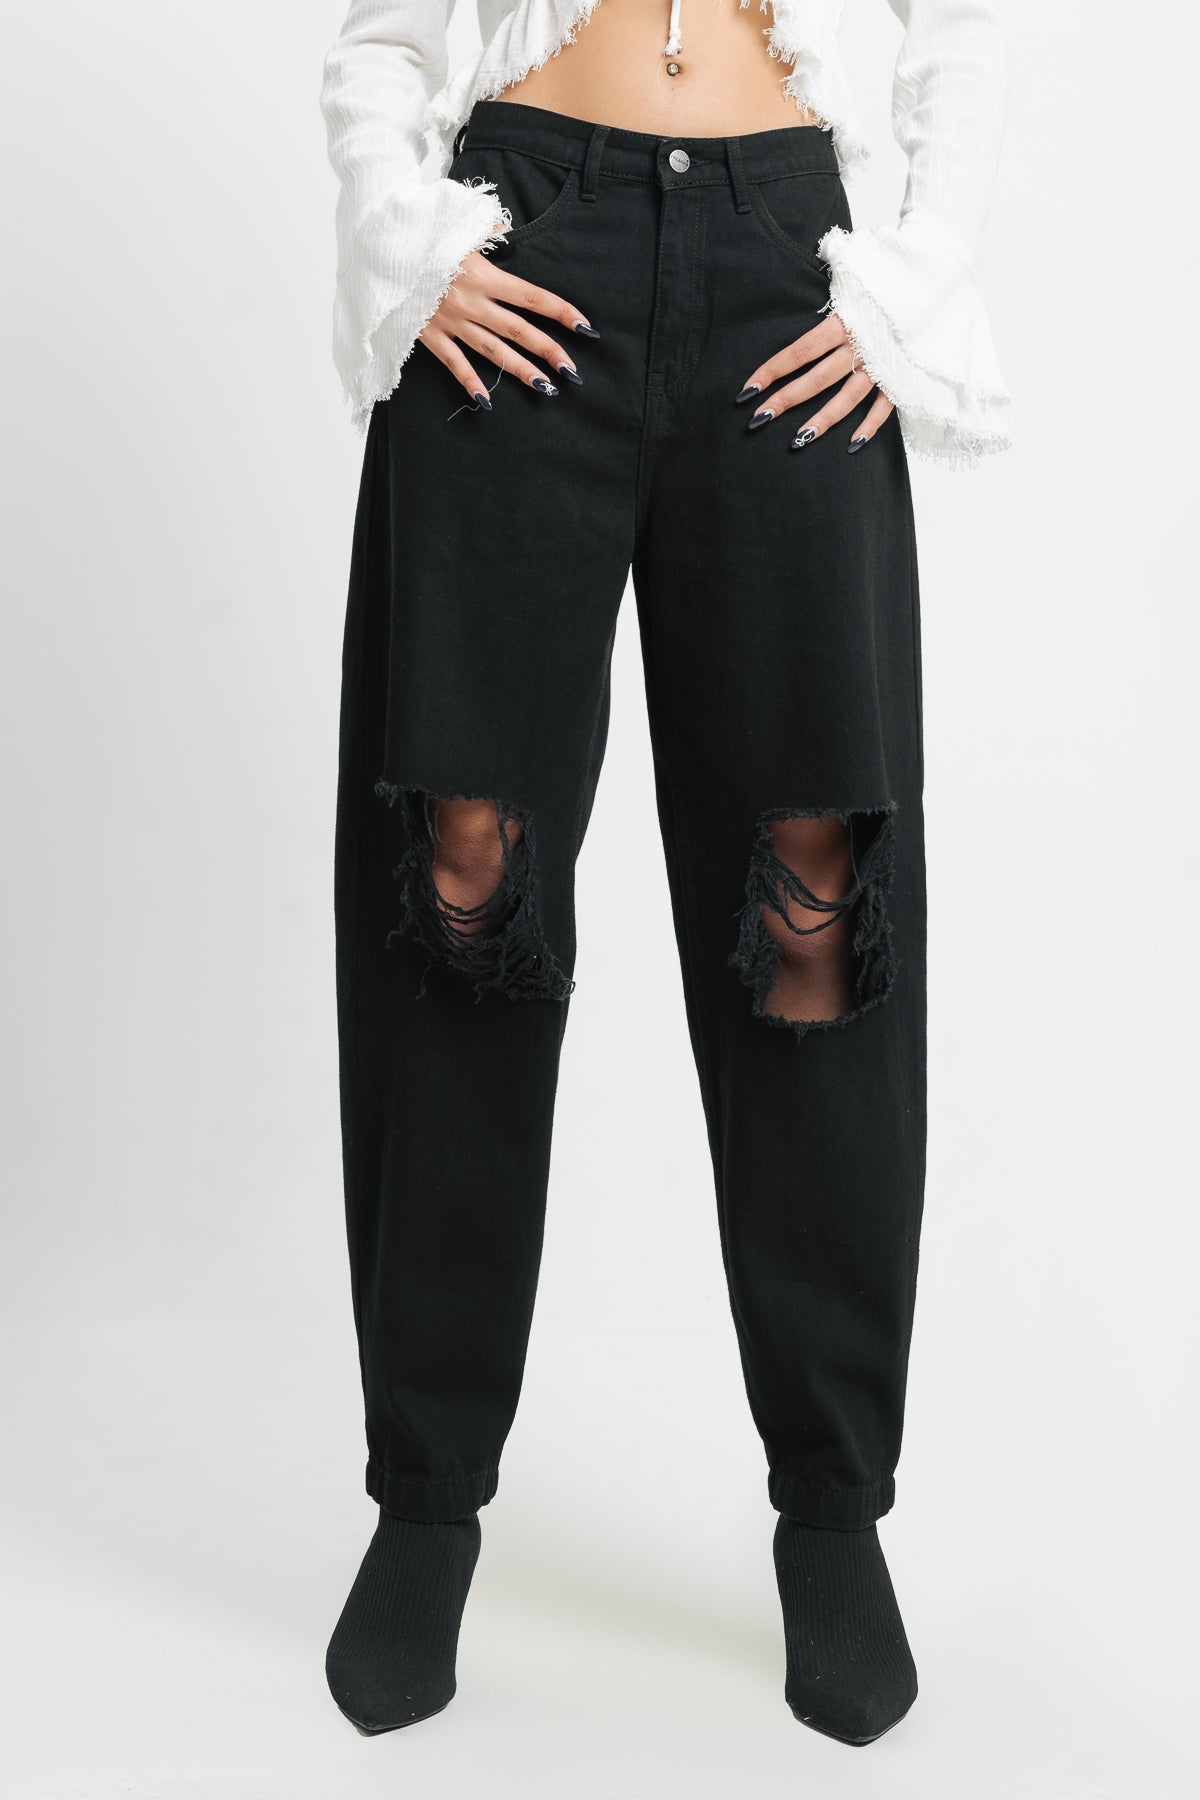 RELAXED FIT TORN BLACK JEANS